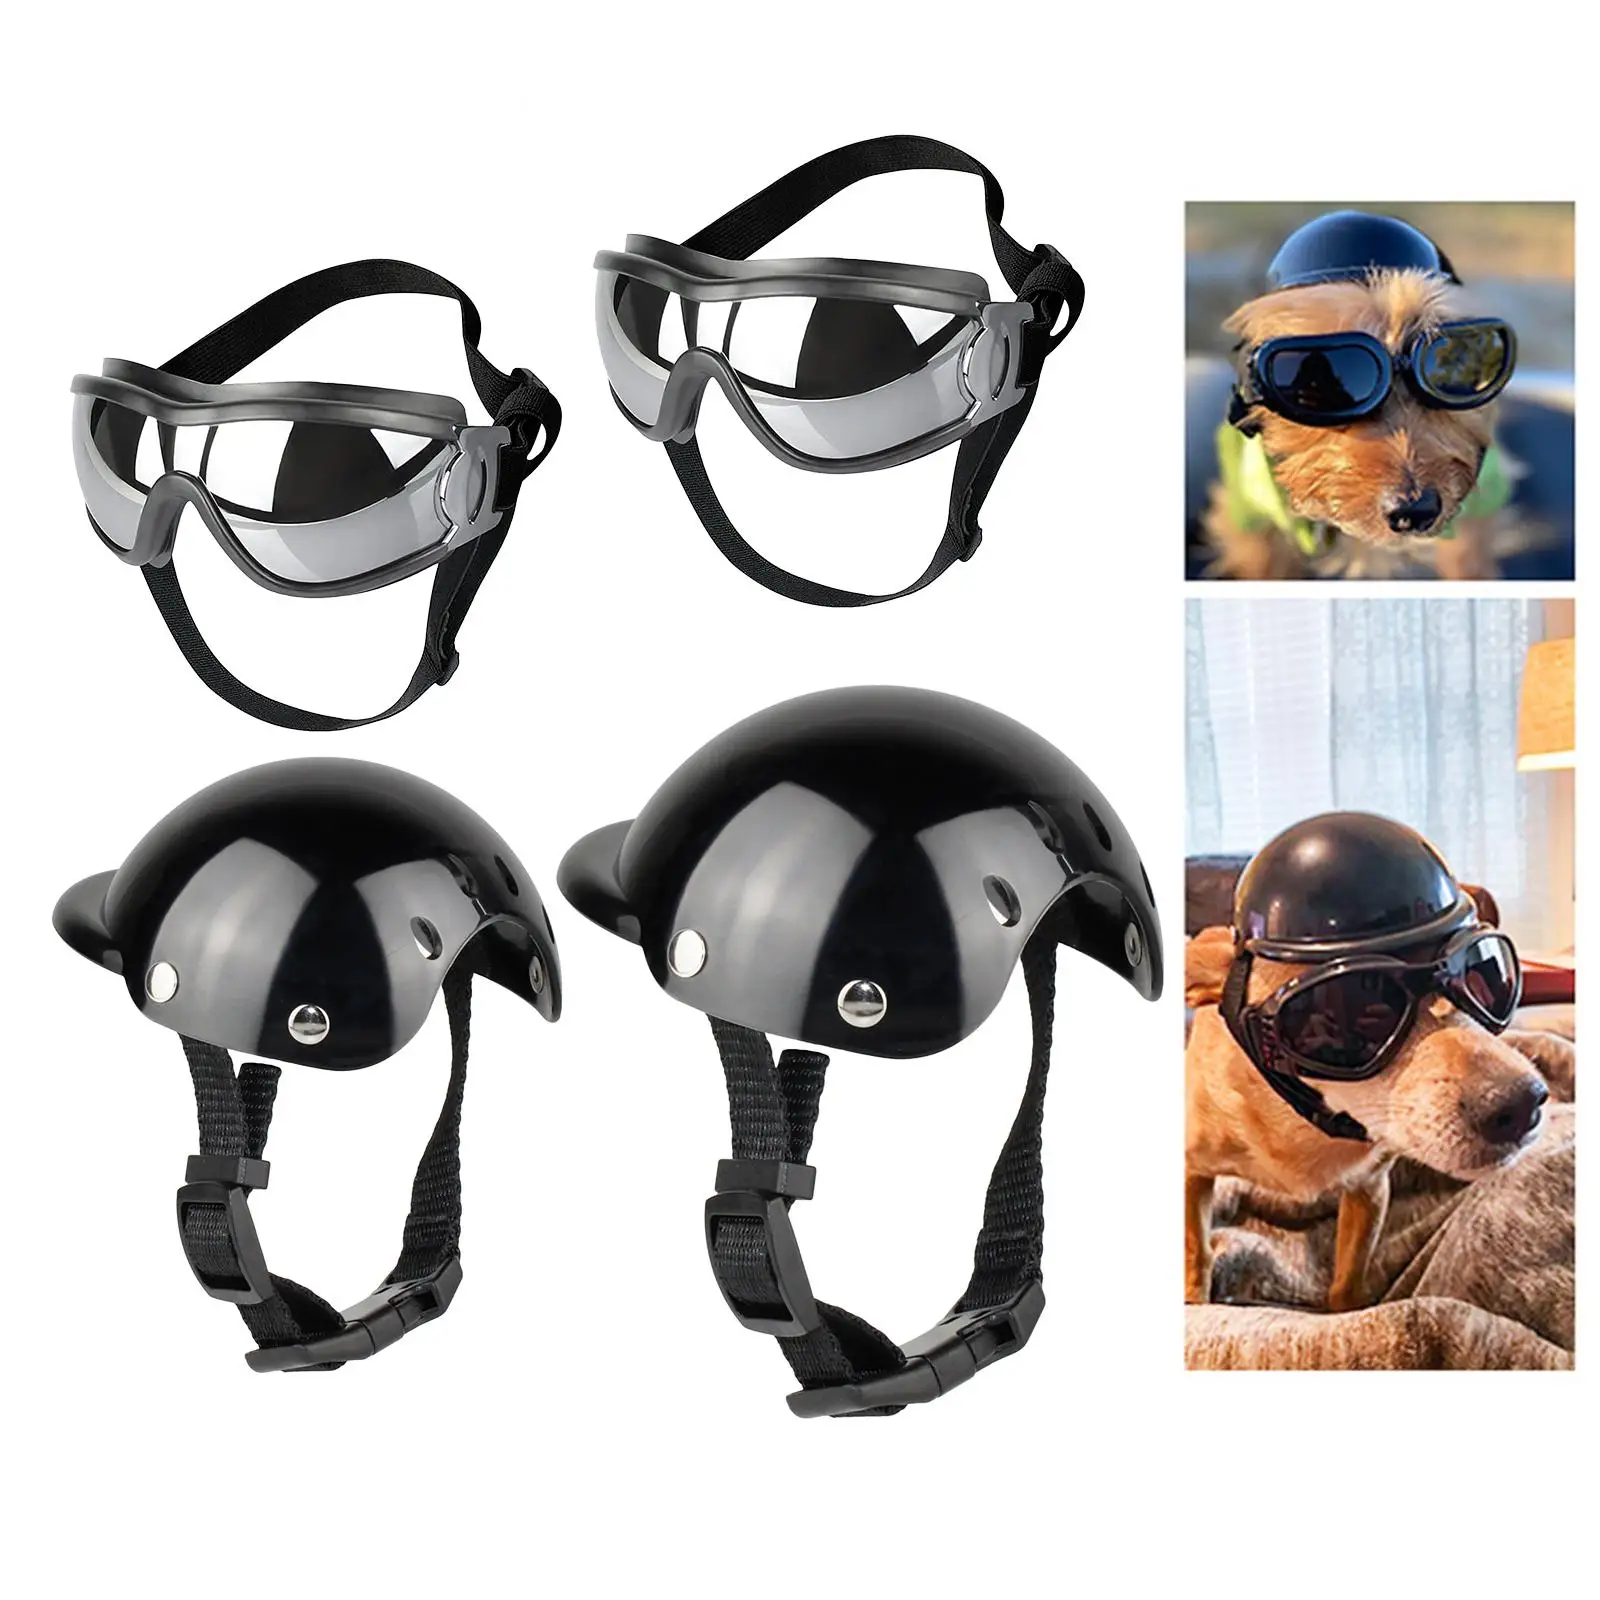 Summer Pet Dog Hat Breathable Sunglasses Hats Adjustable Puppy Sun Hat For Small Dogs Outdoor Walking Dogs Supplies Costumes